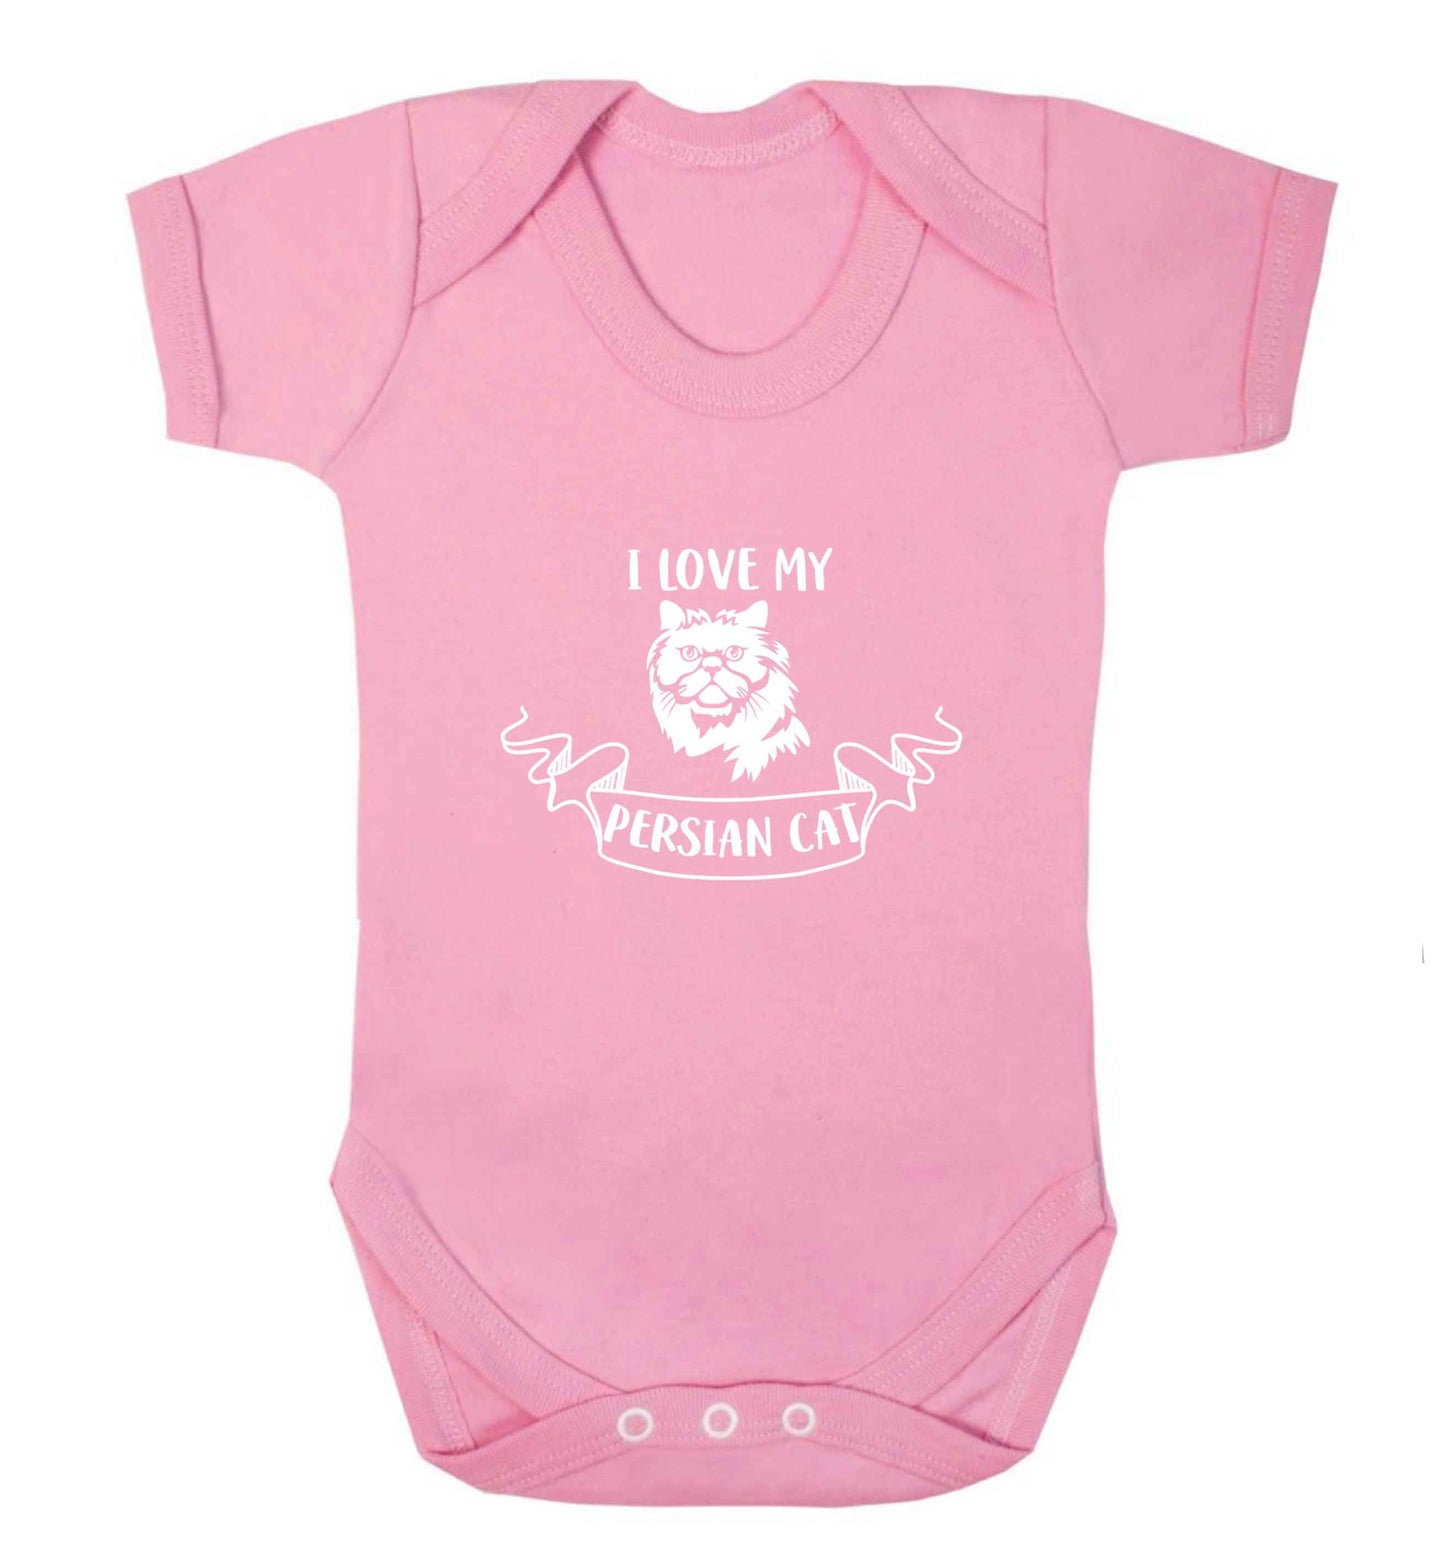 I love my persian cat baby vest pale pink 18-24 months